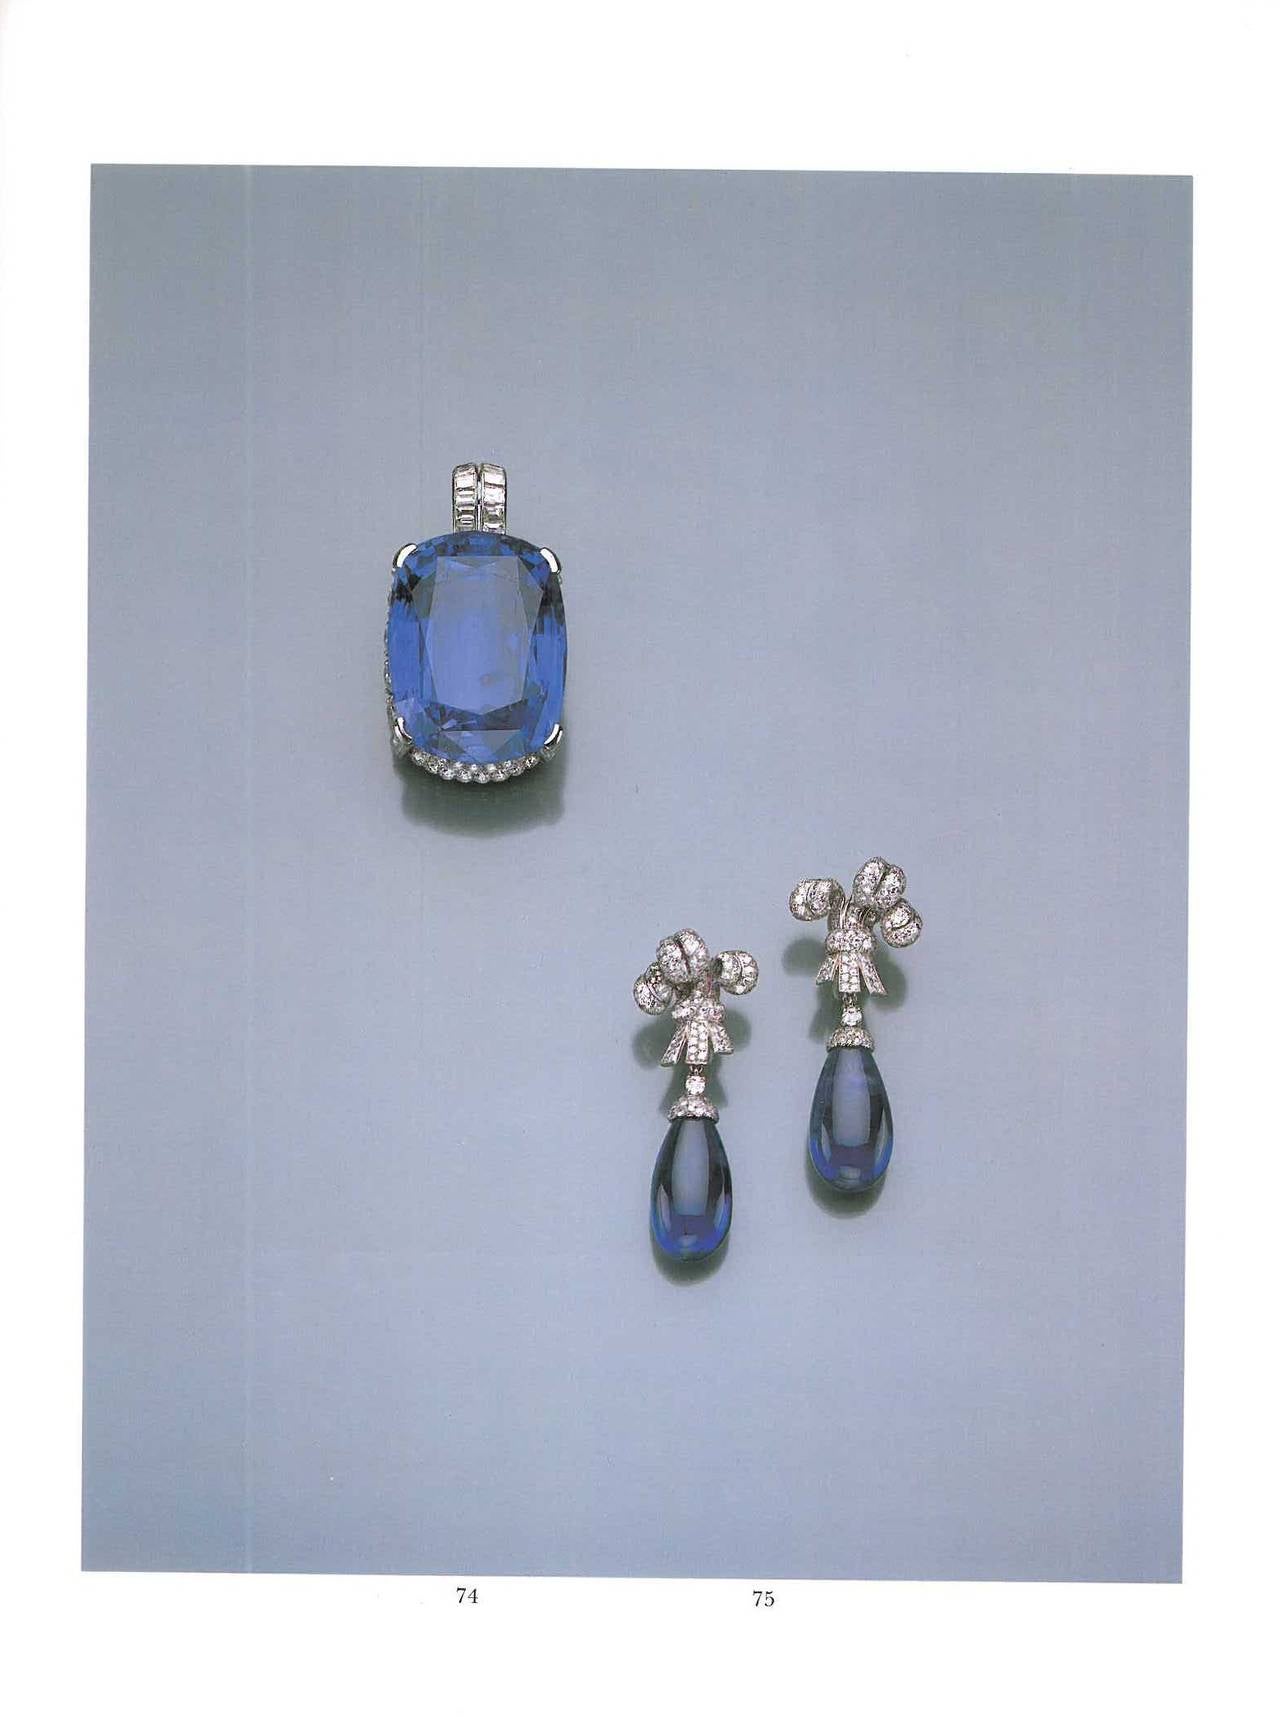 Women's Book of the Jewels of the Duchess of Windsor, Sotheby's, April 1987